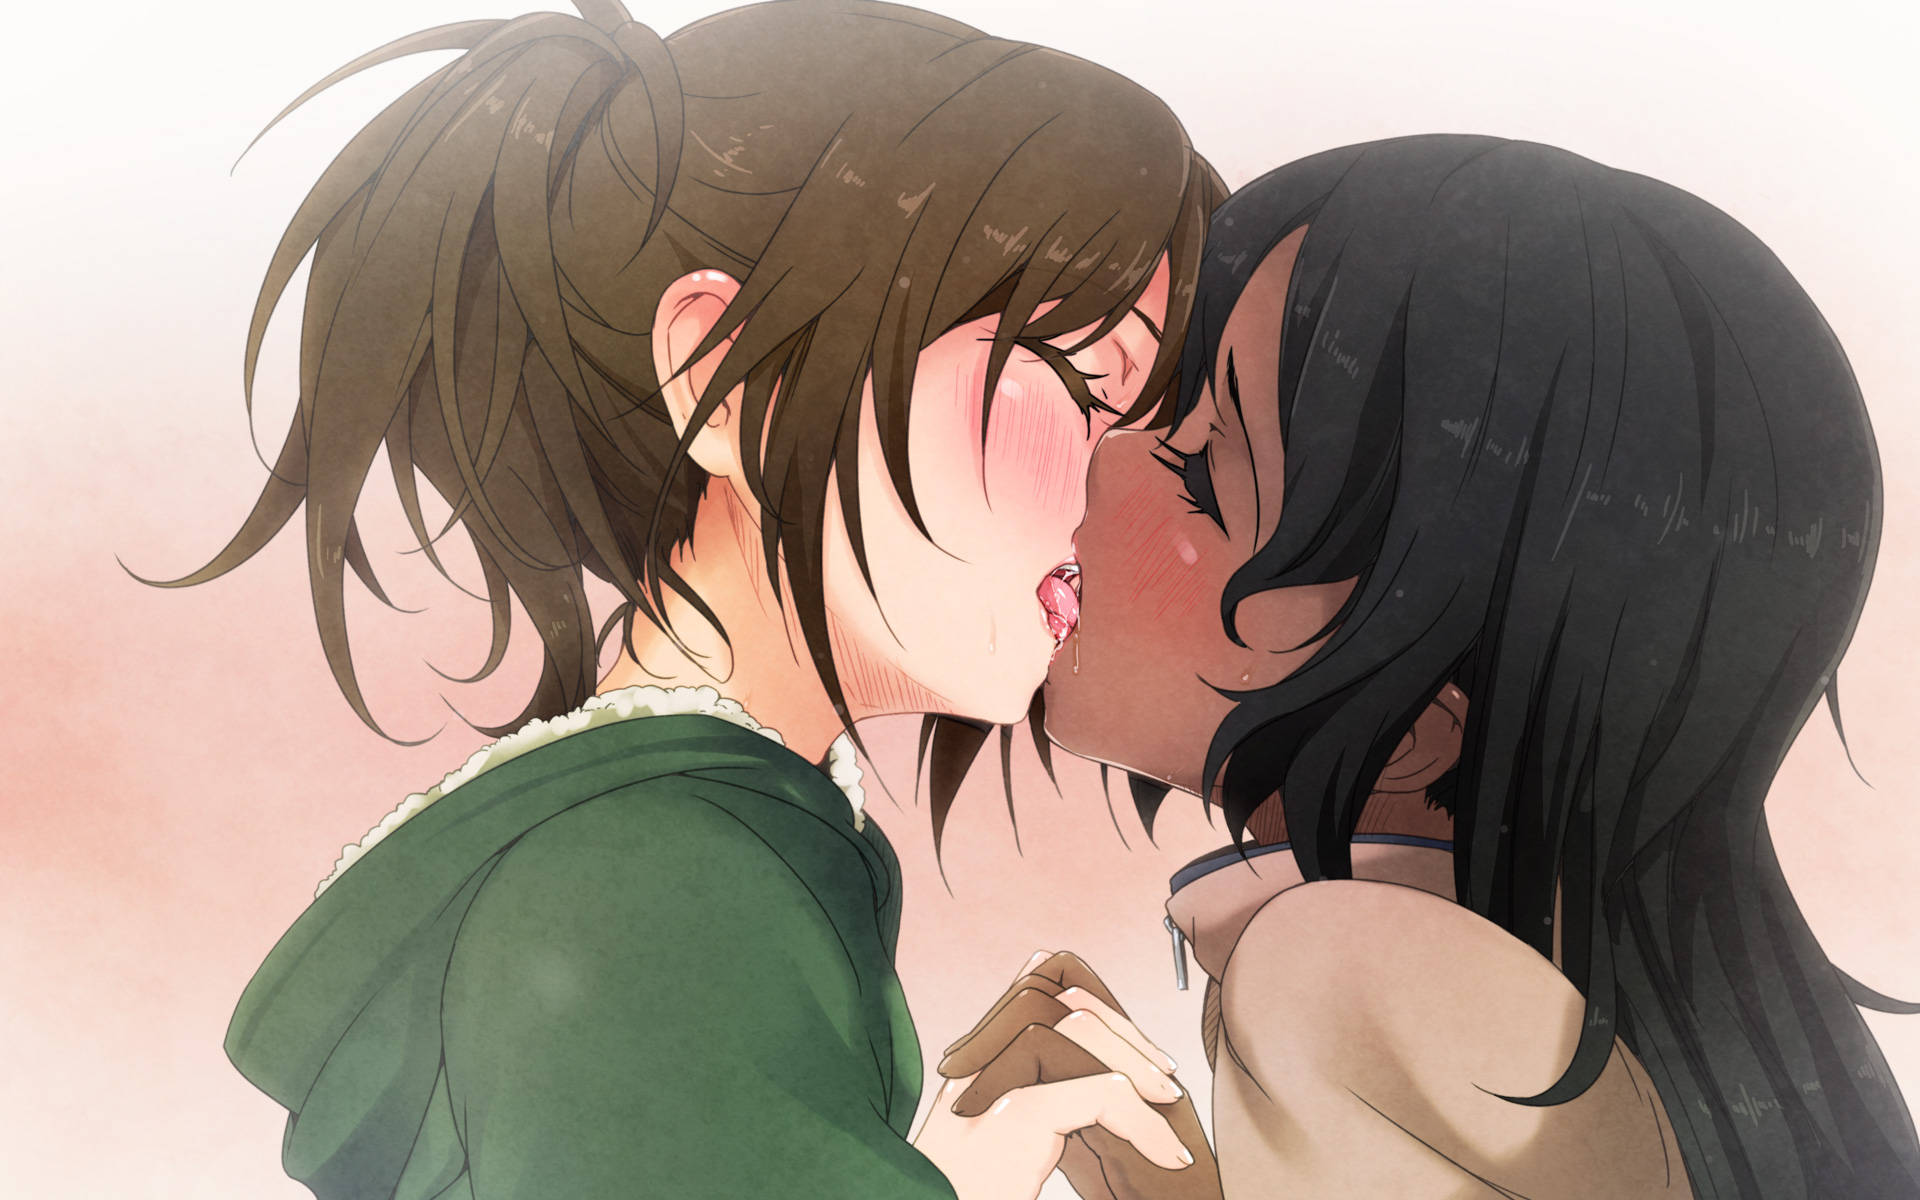 Anime lesbians making out